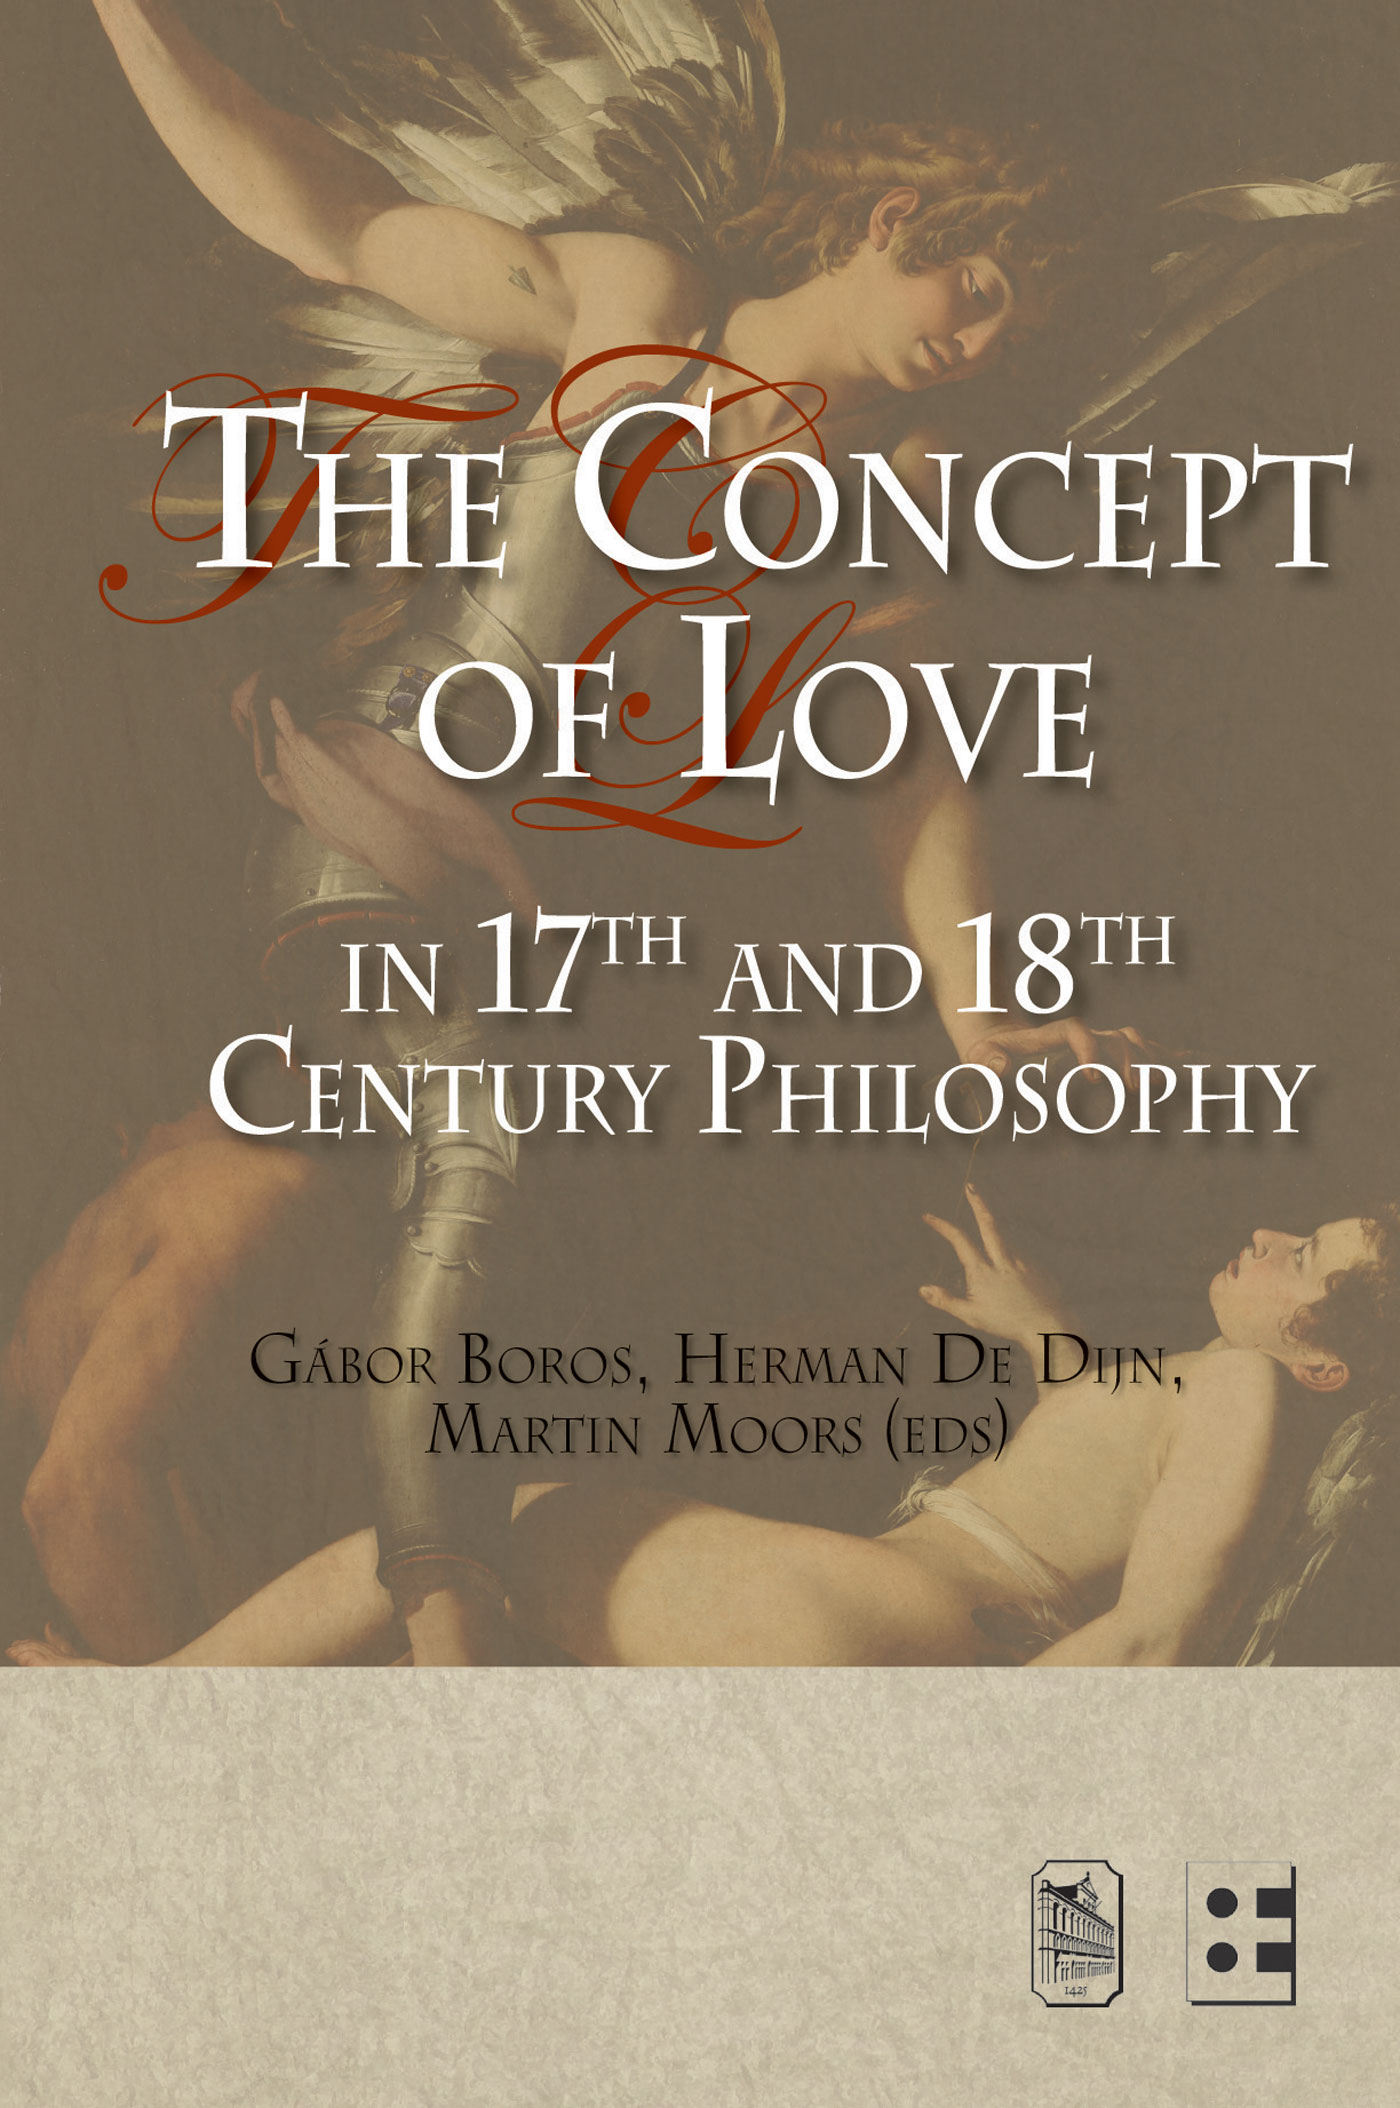 The concept of love in 17th and 18th century philosophy (Ebook)